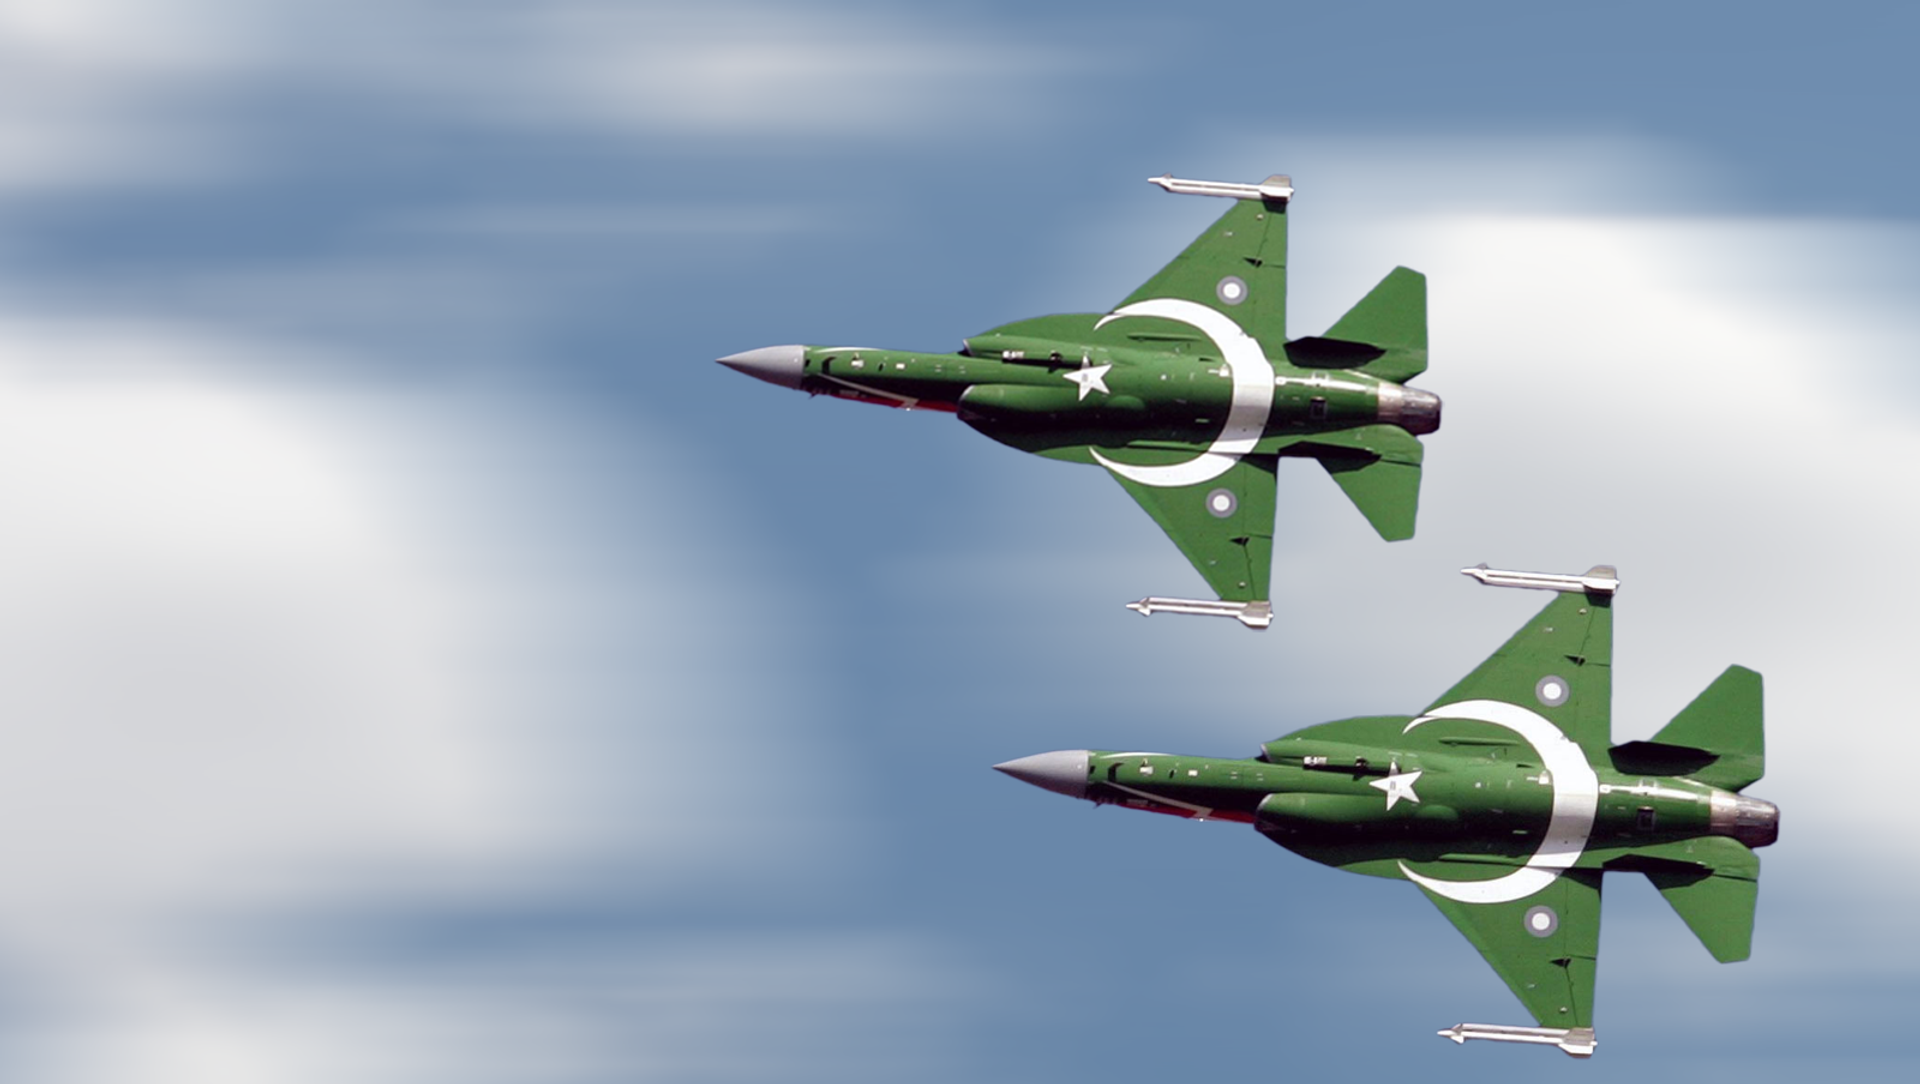 Cac/Pac Jf-17 Thunder Wallpapers